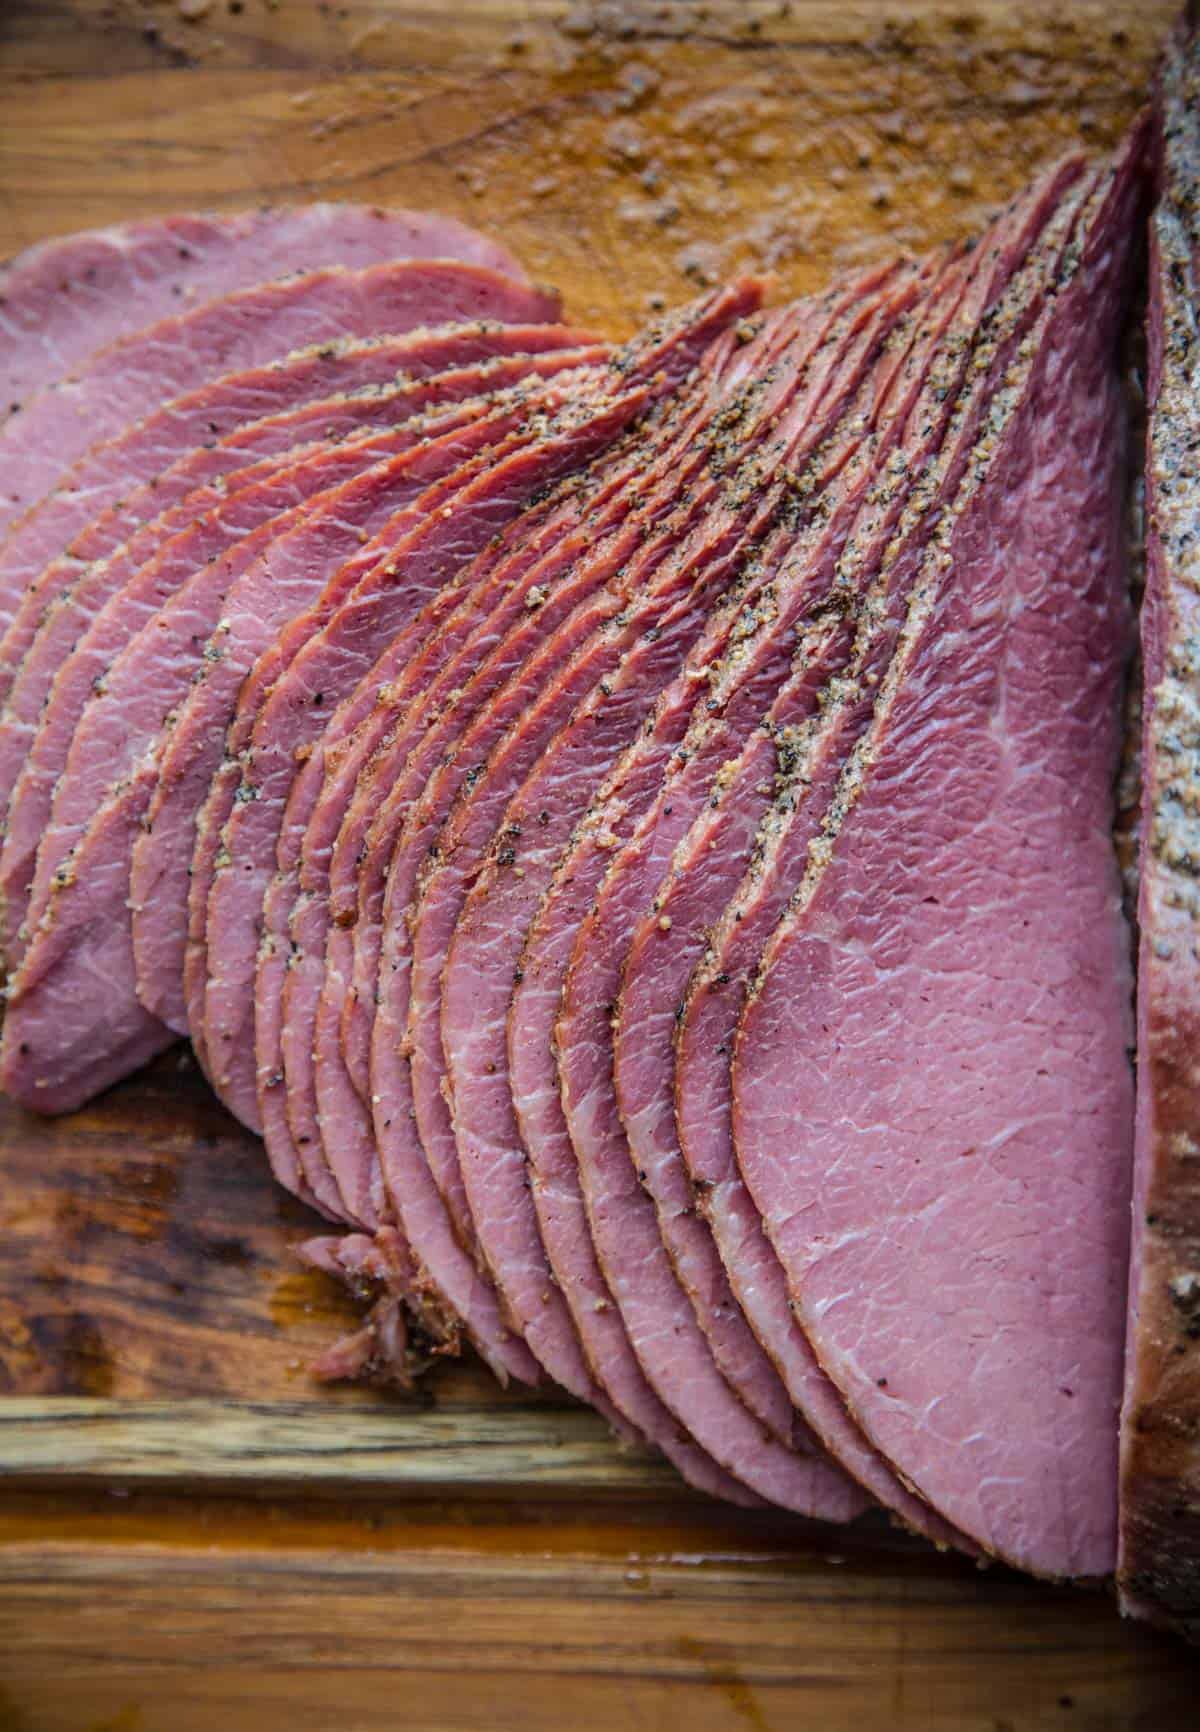 Slices of Corned Beef, perfect for a pastrami sandwich